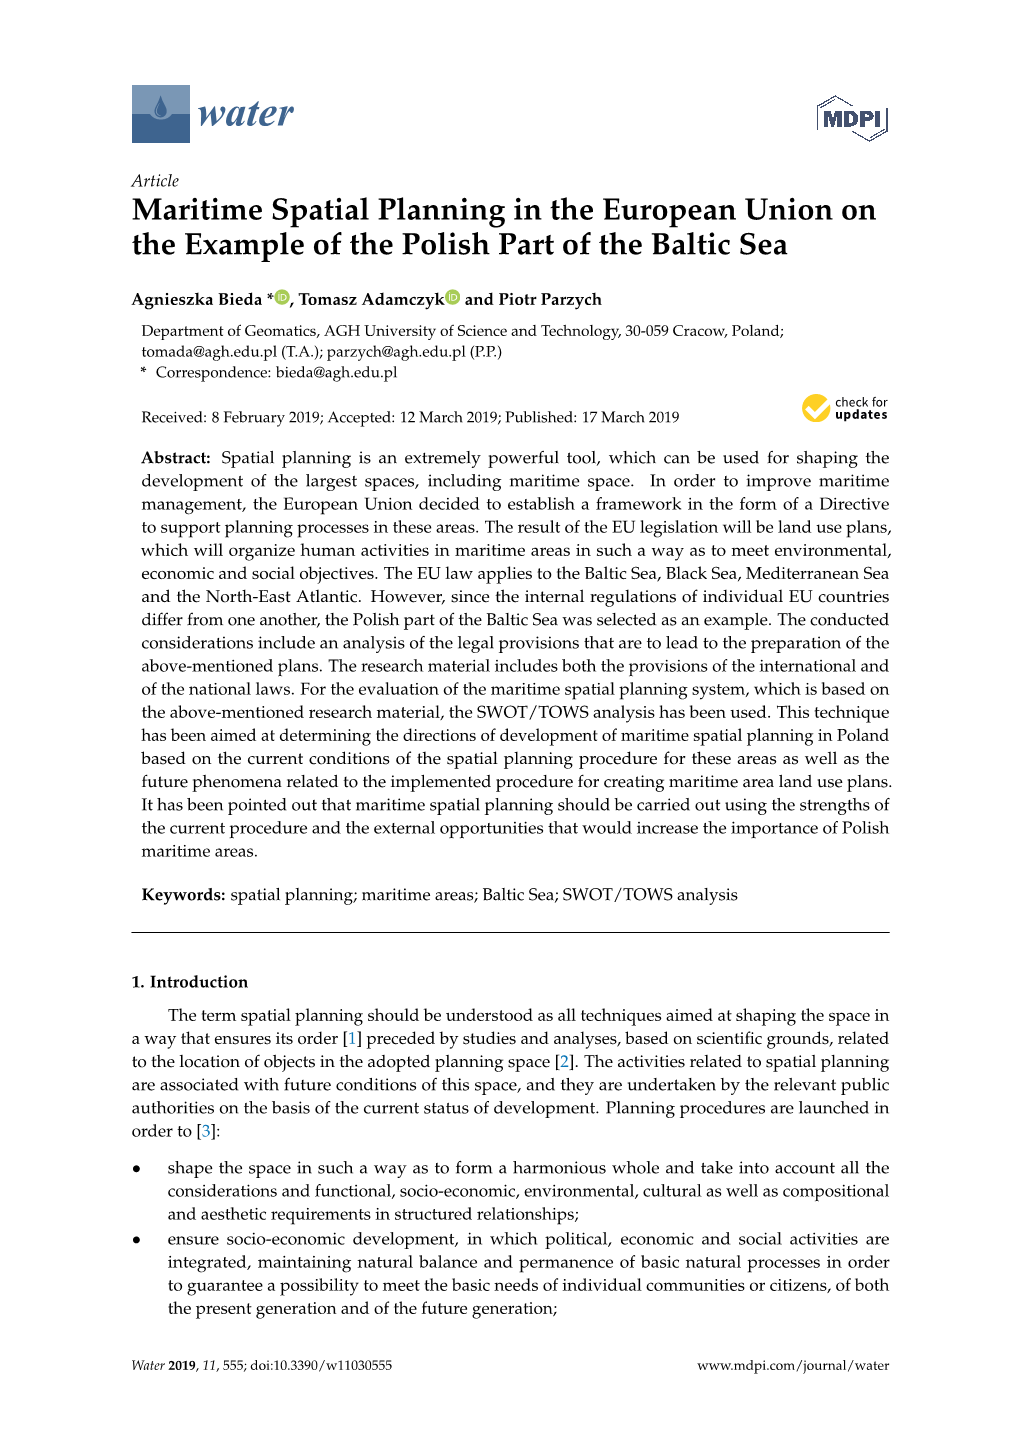 Maritime Spatial Planning in the European Union on the Example of the Polish Part of the Baltic Sea